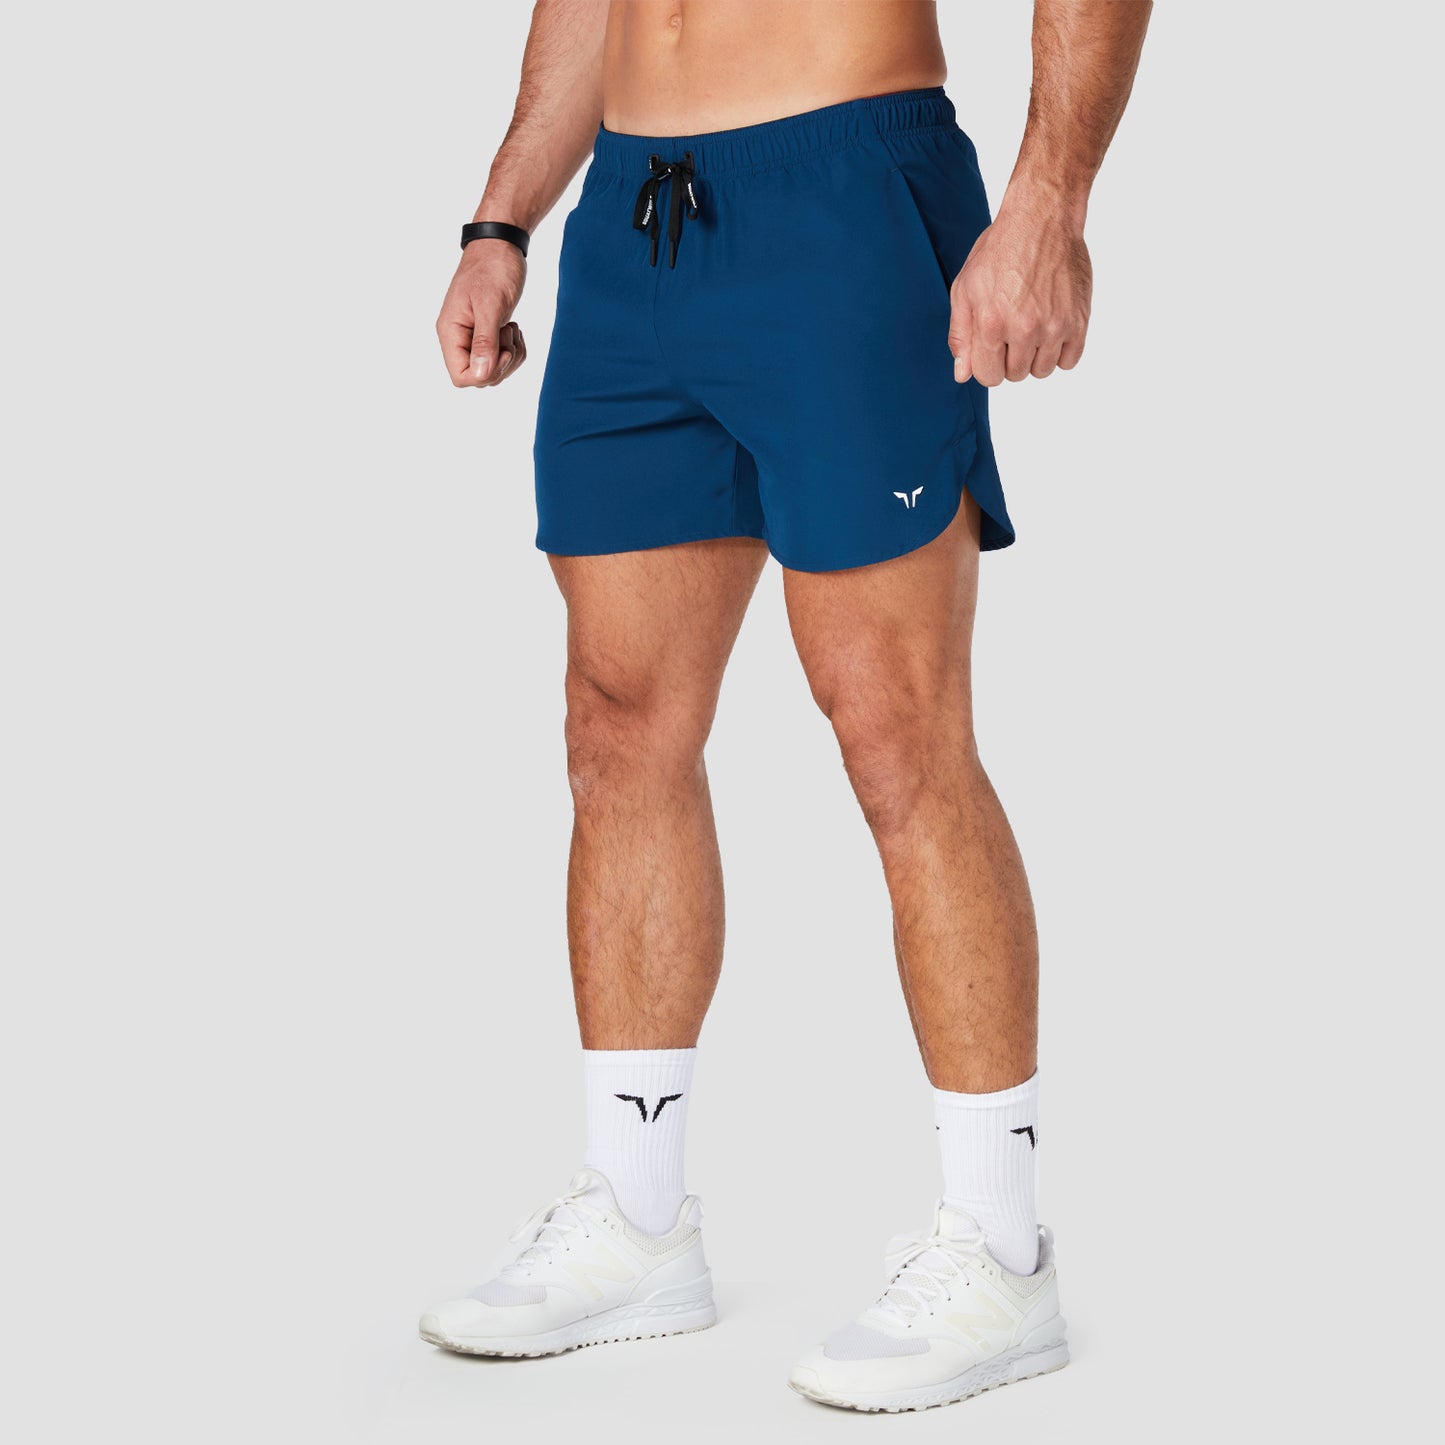 squatwolf-workout-short-for-men-core-mesh-2-in-1-shorts-royal-blue-gym-wear